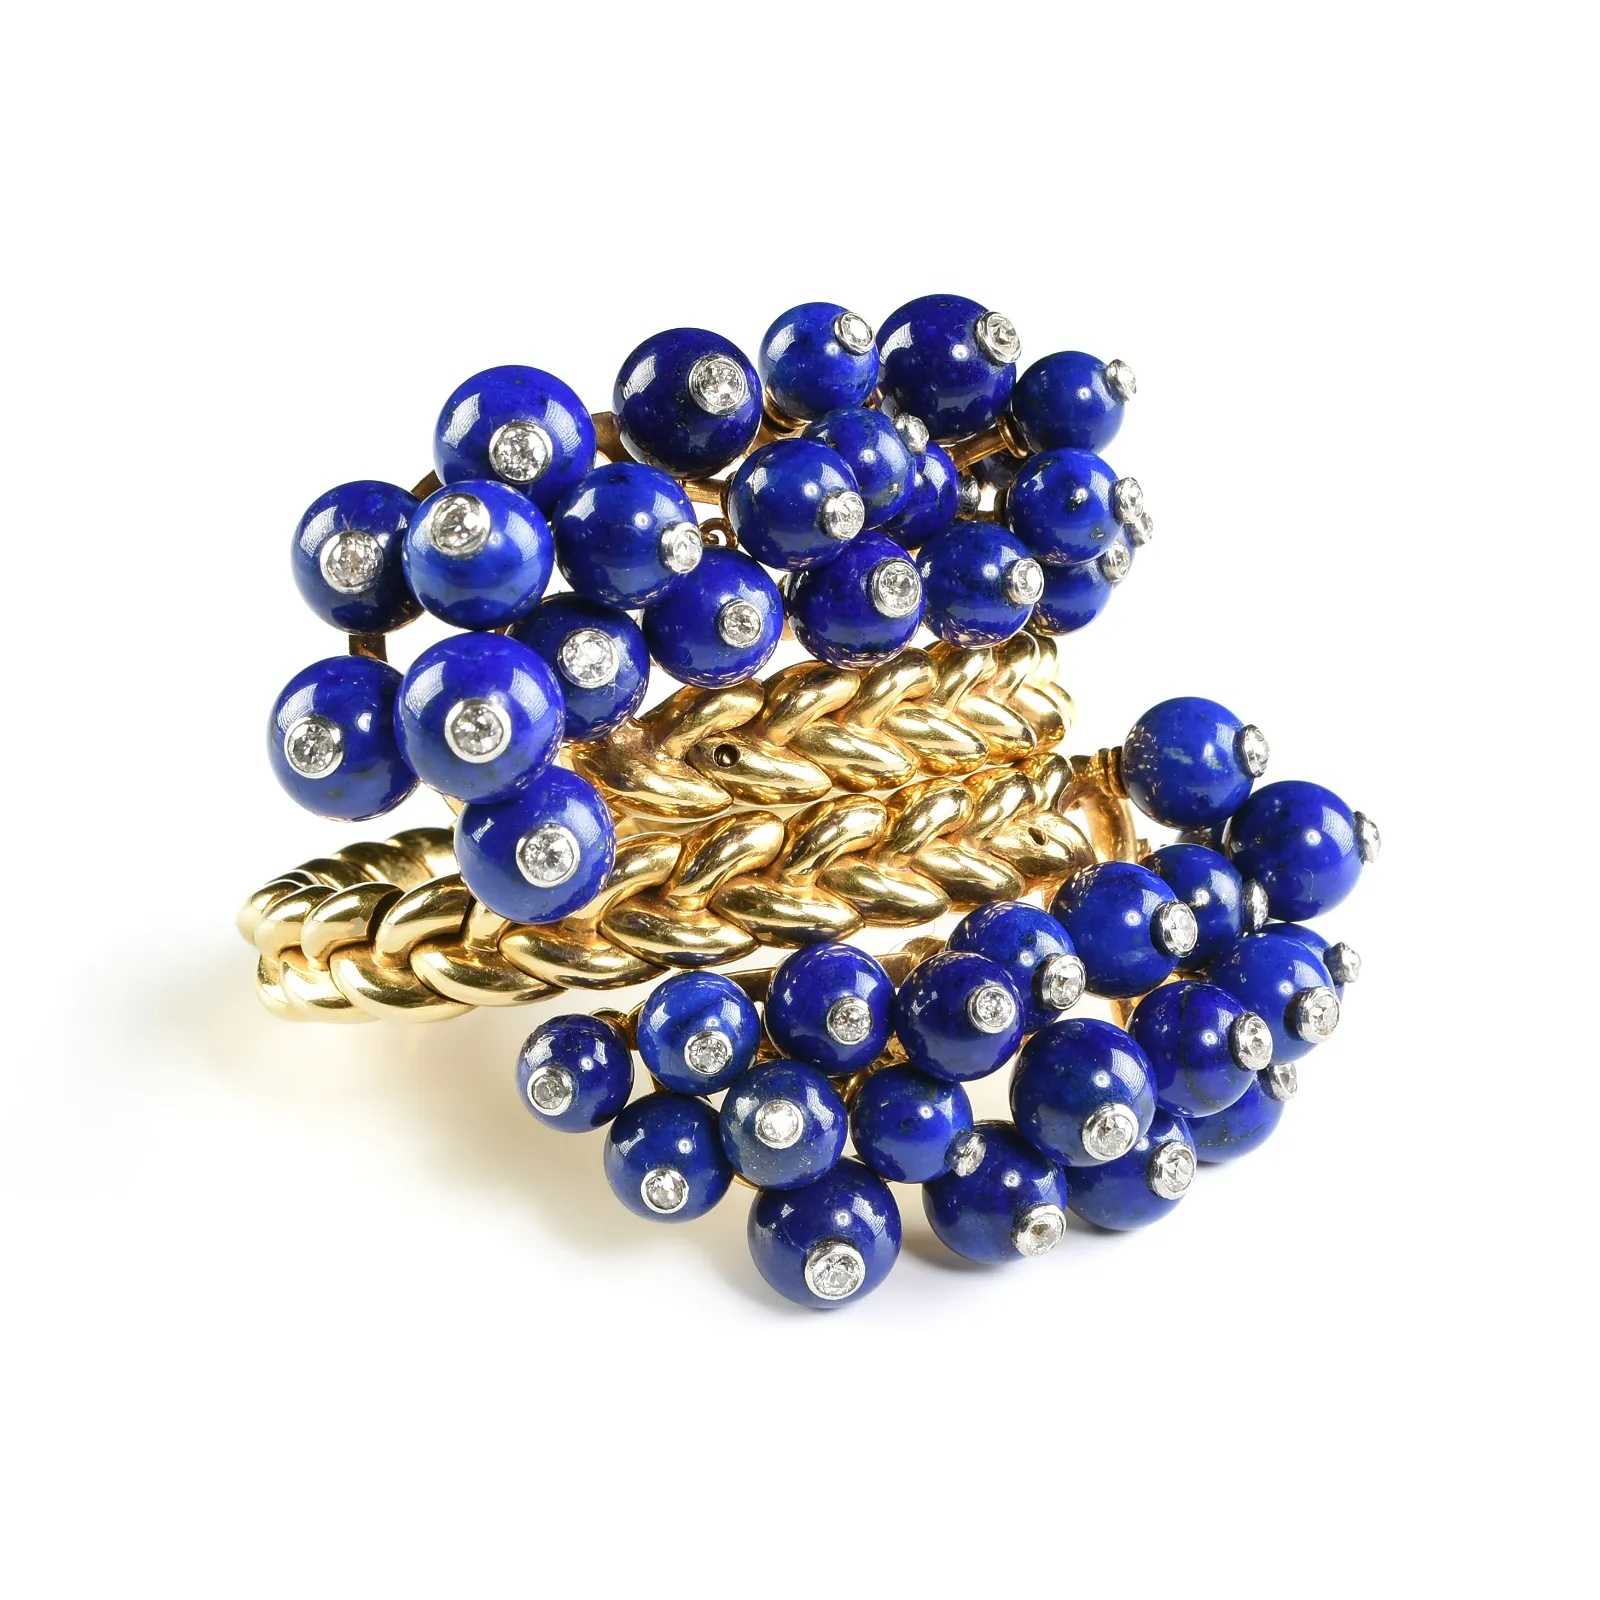 Cartier mid-century gold, natural lapis lazuli, and diamond cuff bracelet, which sold for $35,000 ($44,450 with buyer’s premium) at Simpson Galleries.